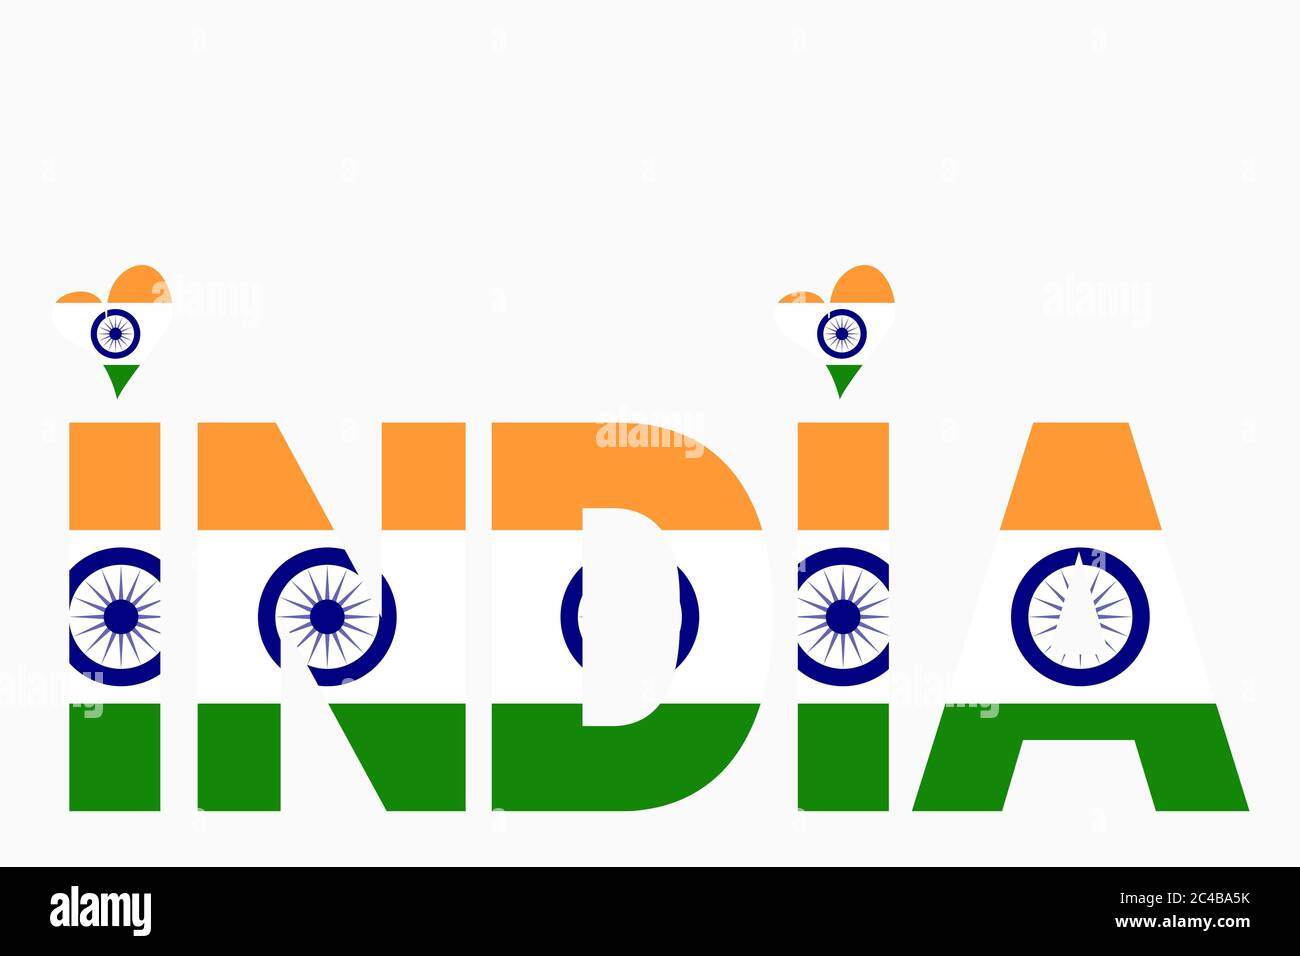 Illustration of India written with Indian National Flag colors. Tiranga (3 colors - Saffron White and Green) with the navy blue wheel Ashok Chakra Stock Photo